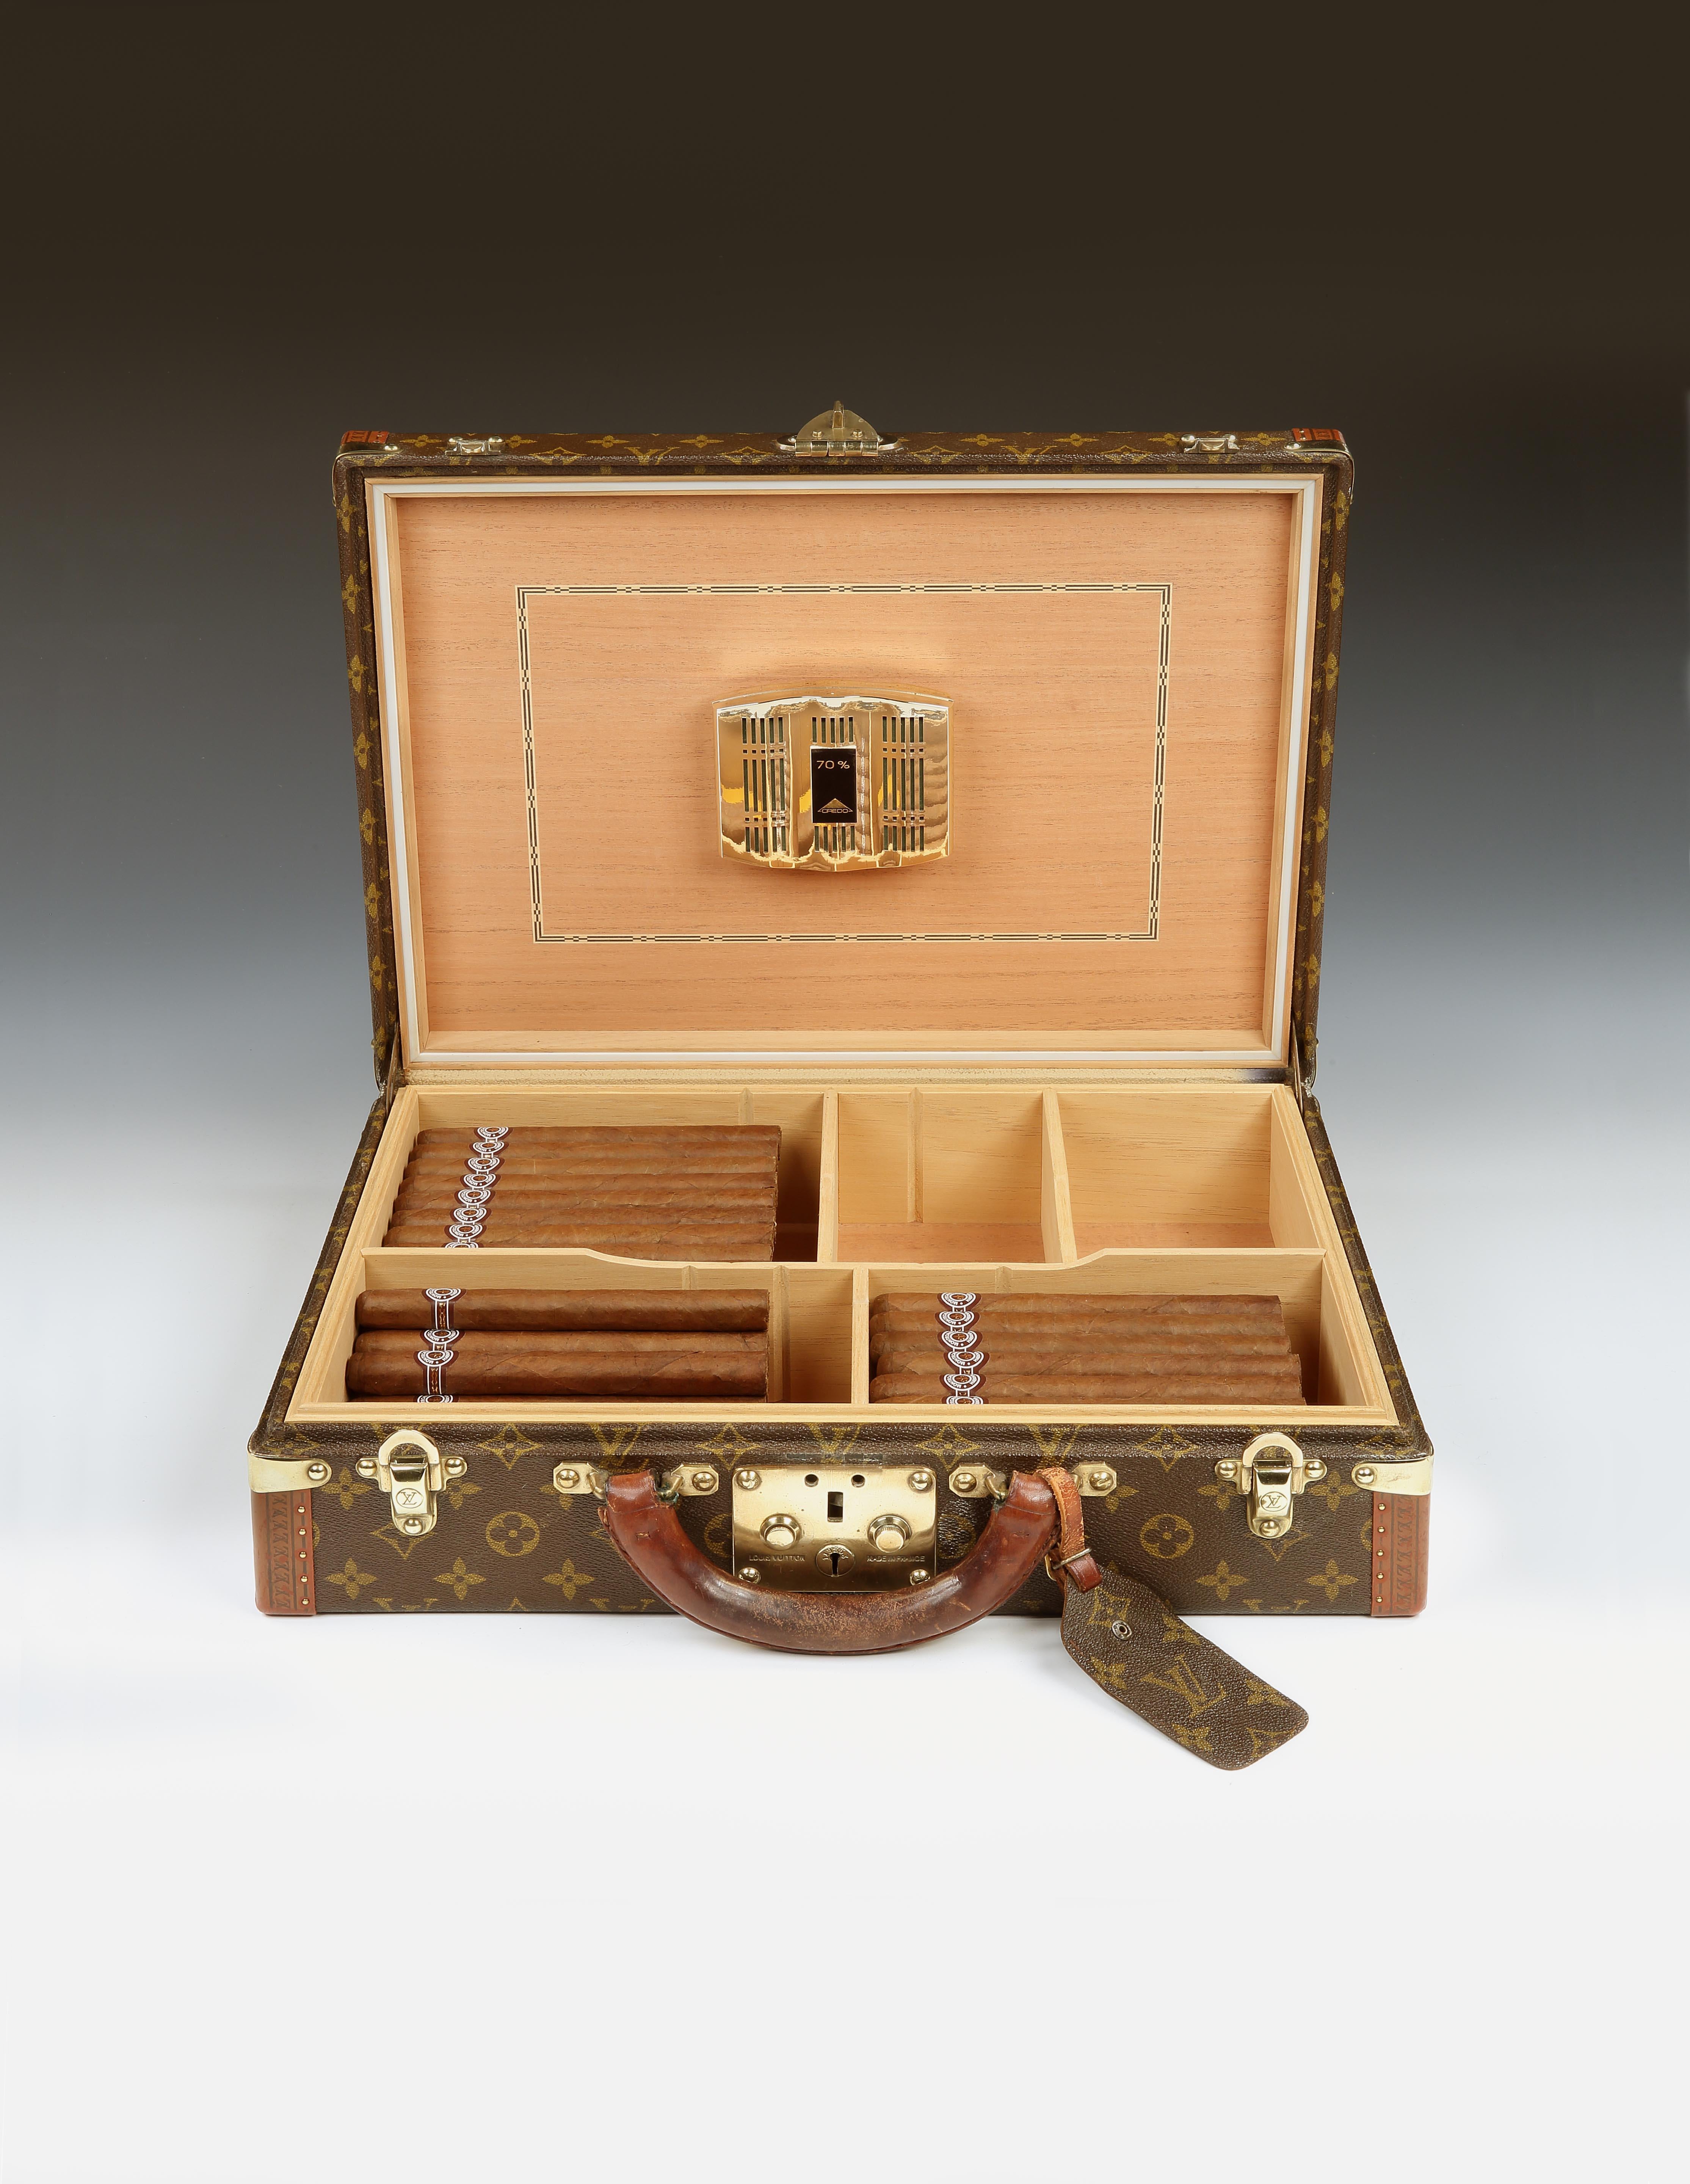 Louis Vuitton, Paris

An original 1960s Président briefcase in the Classic Monogramme pattern, the interior fully converted by our expert humidor specialists into a generous Spanish cedar-lined cigar humidor, with removable and adjustable dividers